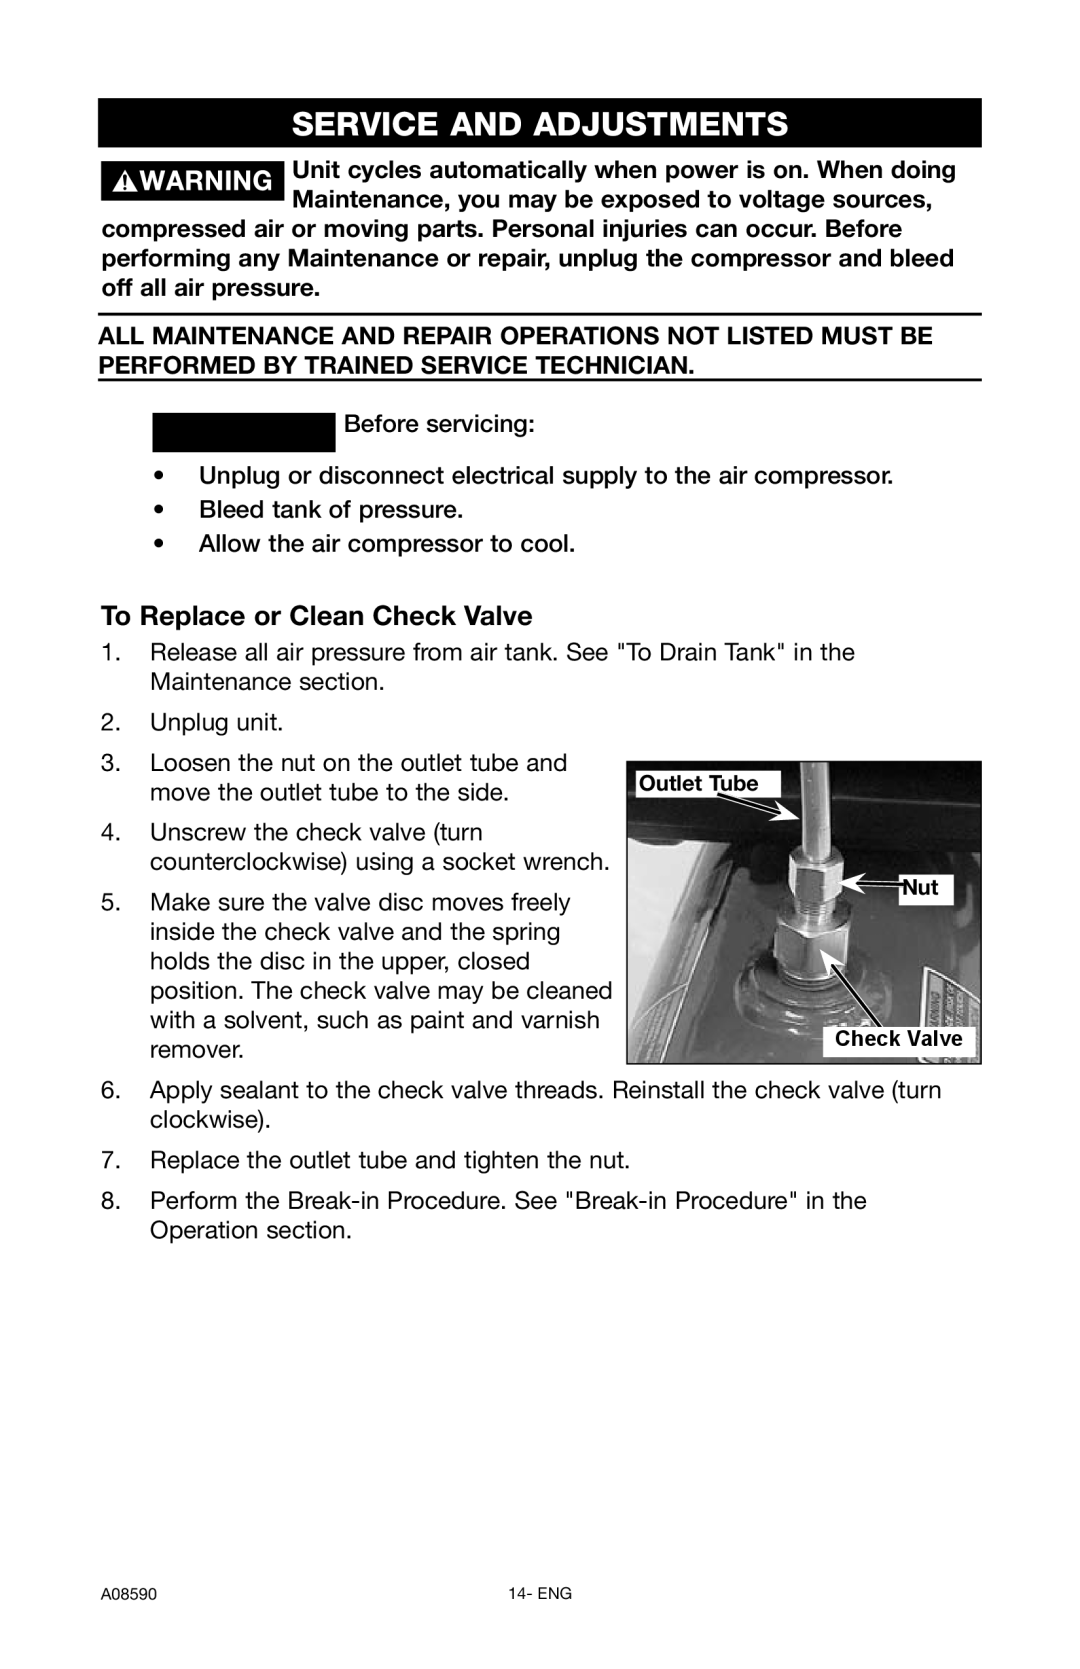 Delta A08590 instruction manual Service And Adjustments, To Replace or Clean Check Valve 